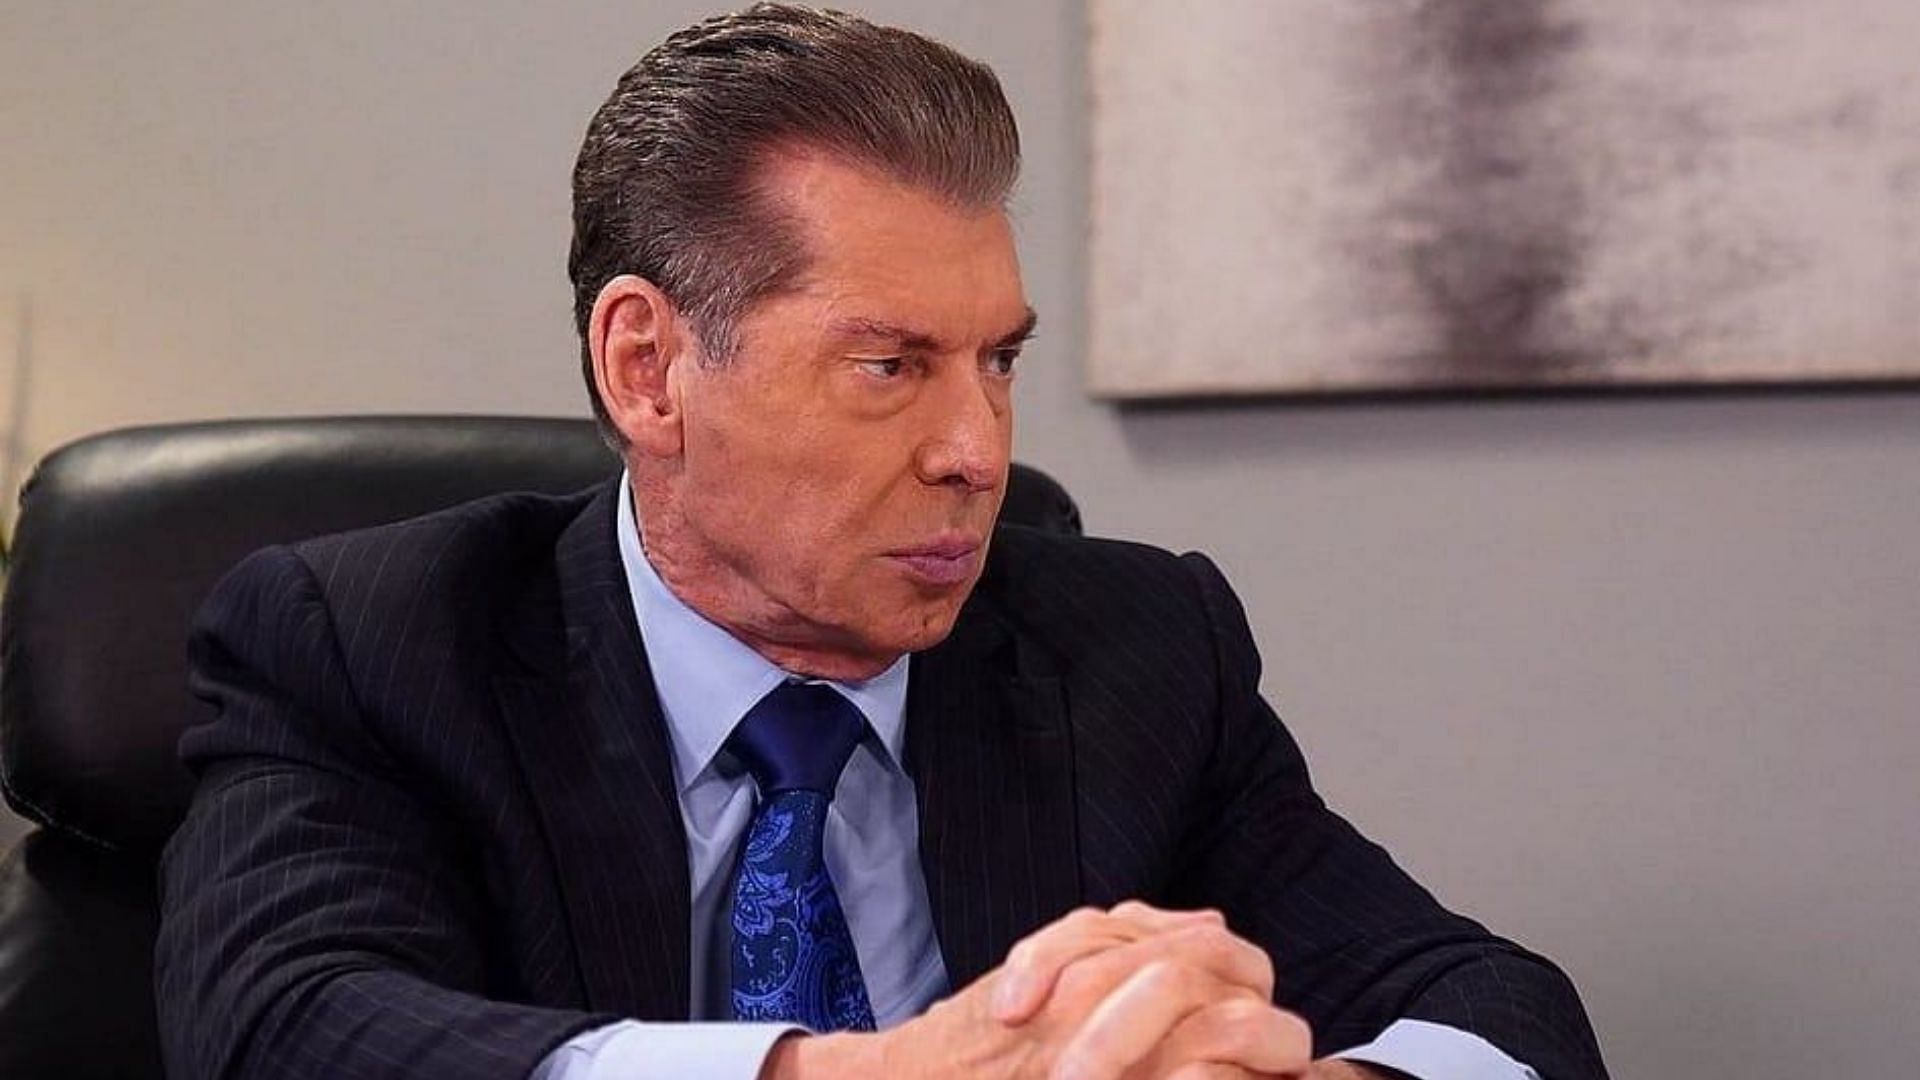 Vince McMahon returned to WWE TV to be a part of an intriguing storyline.